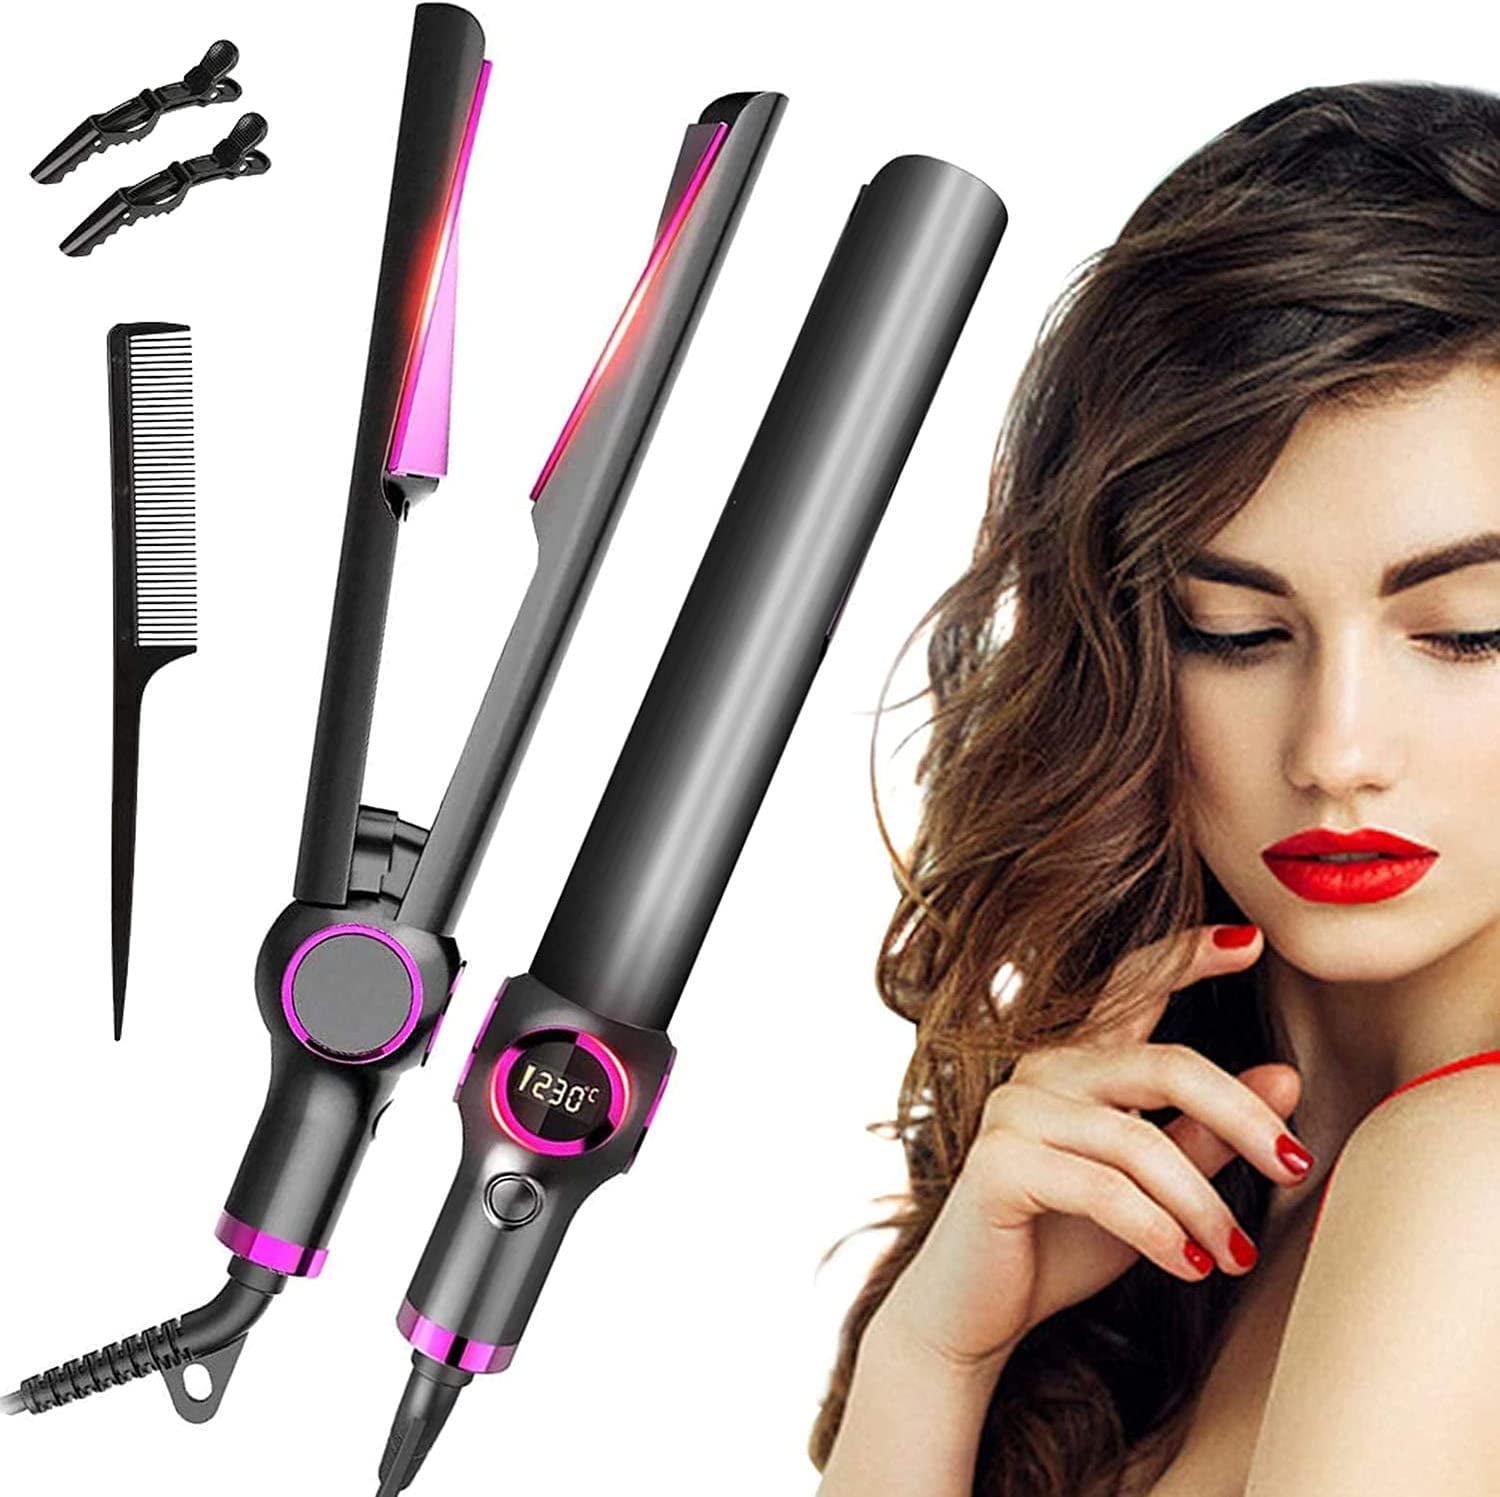 Hair straightener curling and straightening iron Straightening iron and  curling iron 2 in 1 with digital display, curling and straightening,  adjustable temperature, straight, curling and wave. 